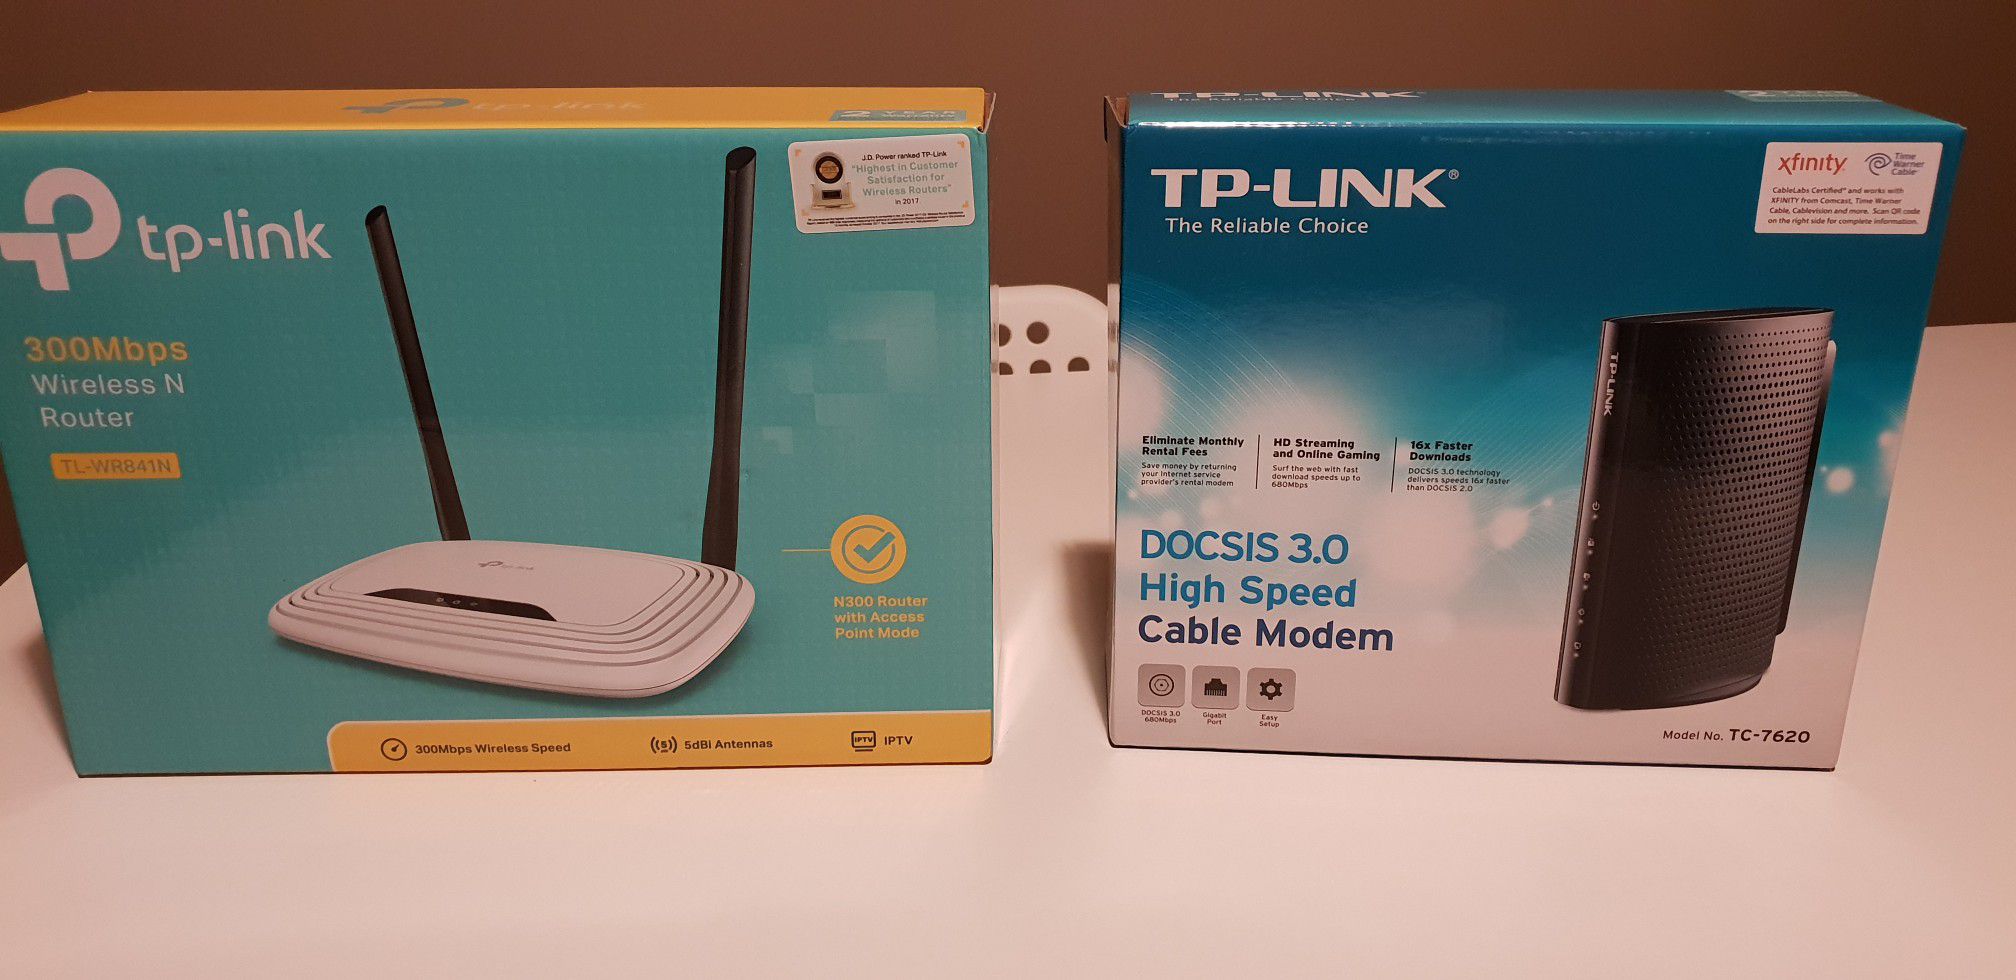 TP-LINK modem and router